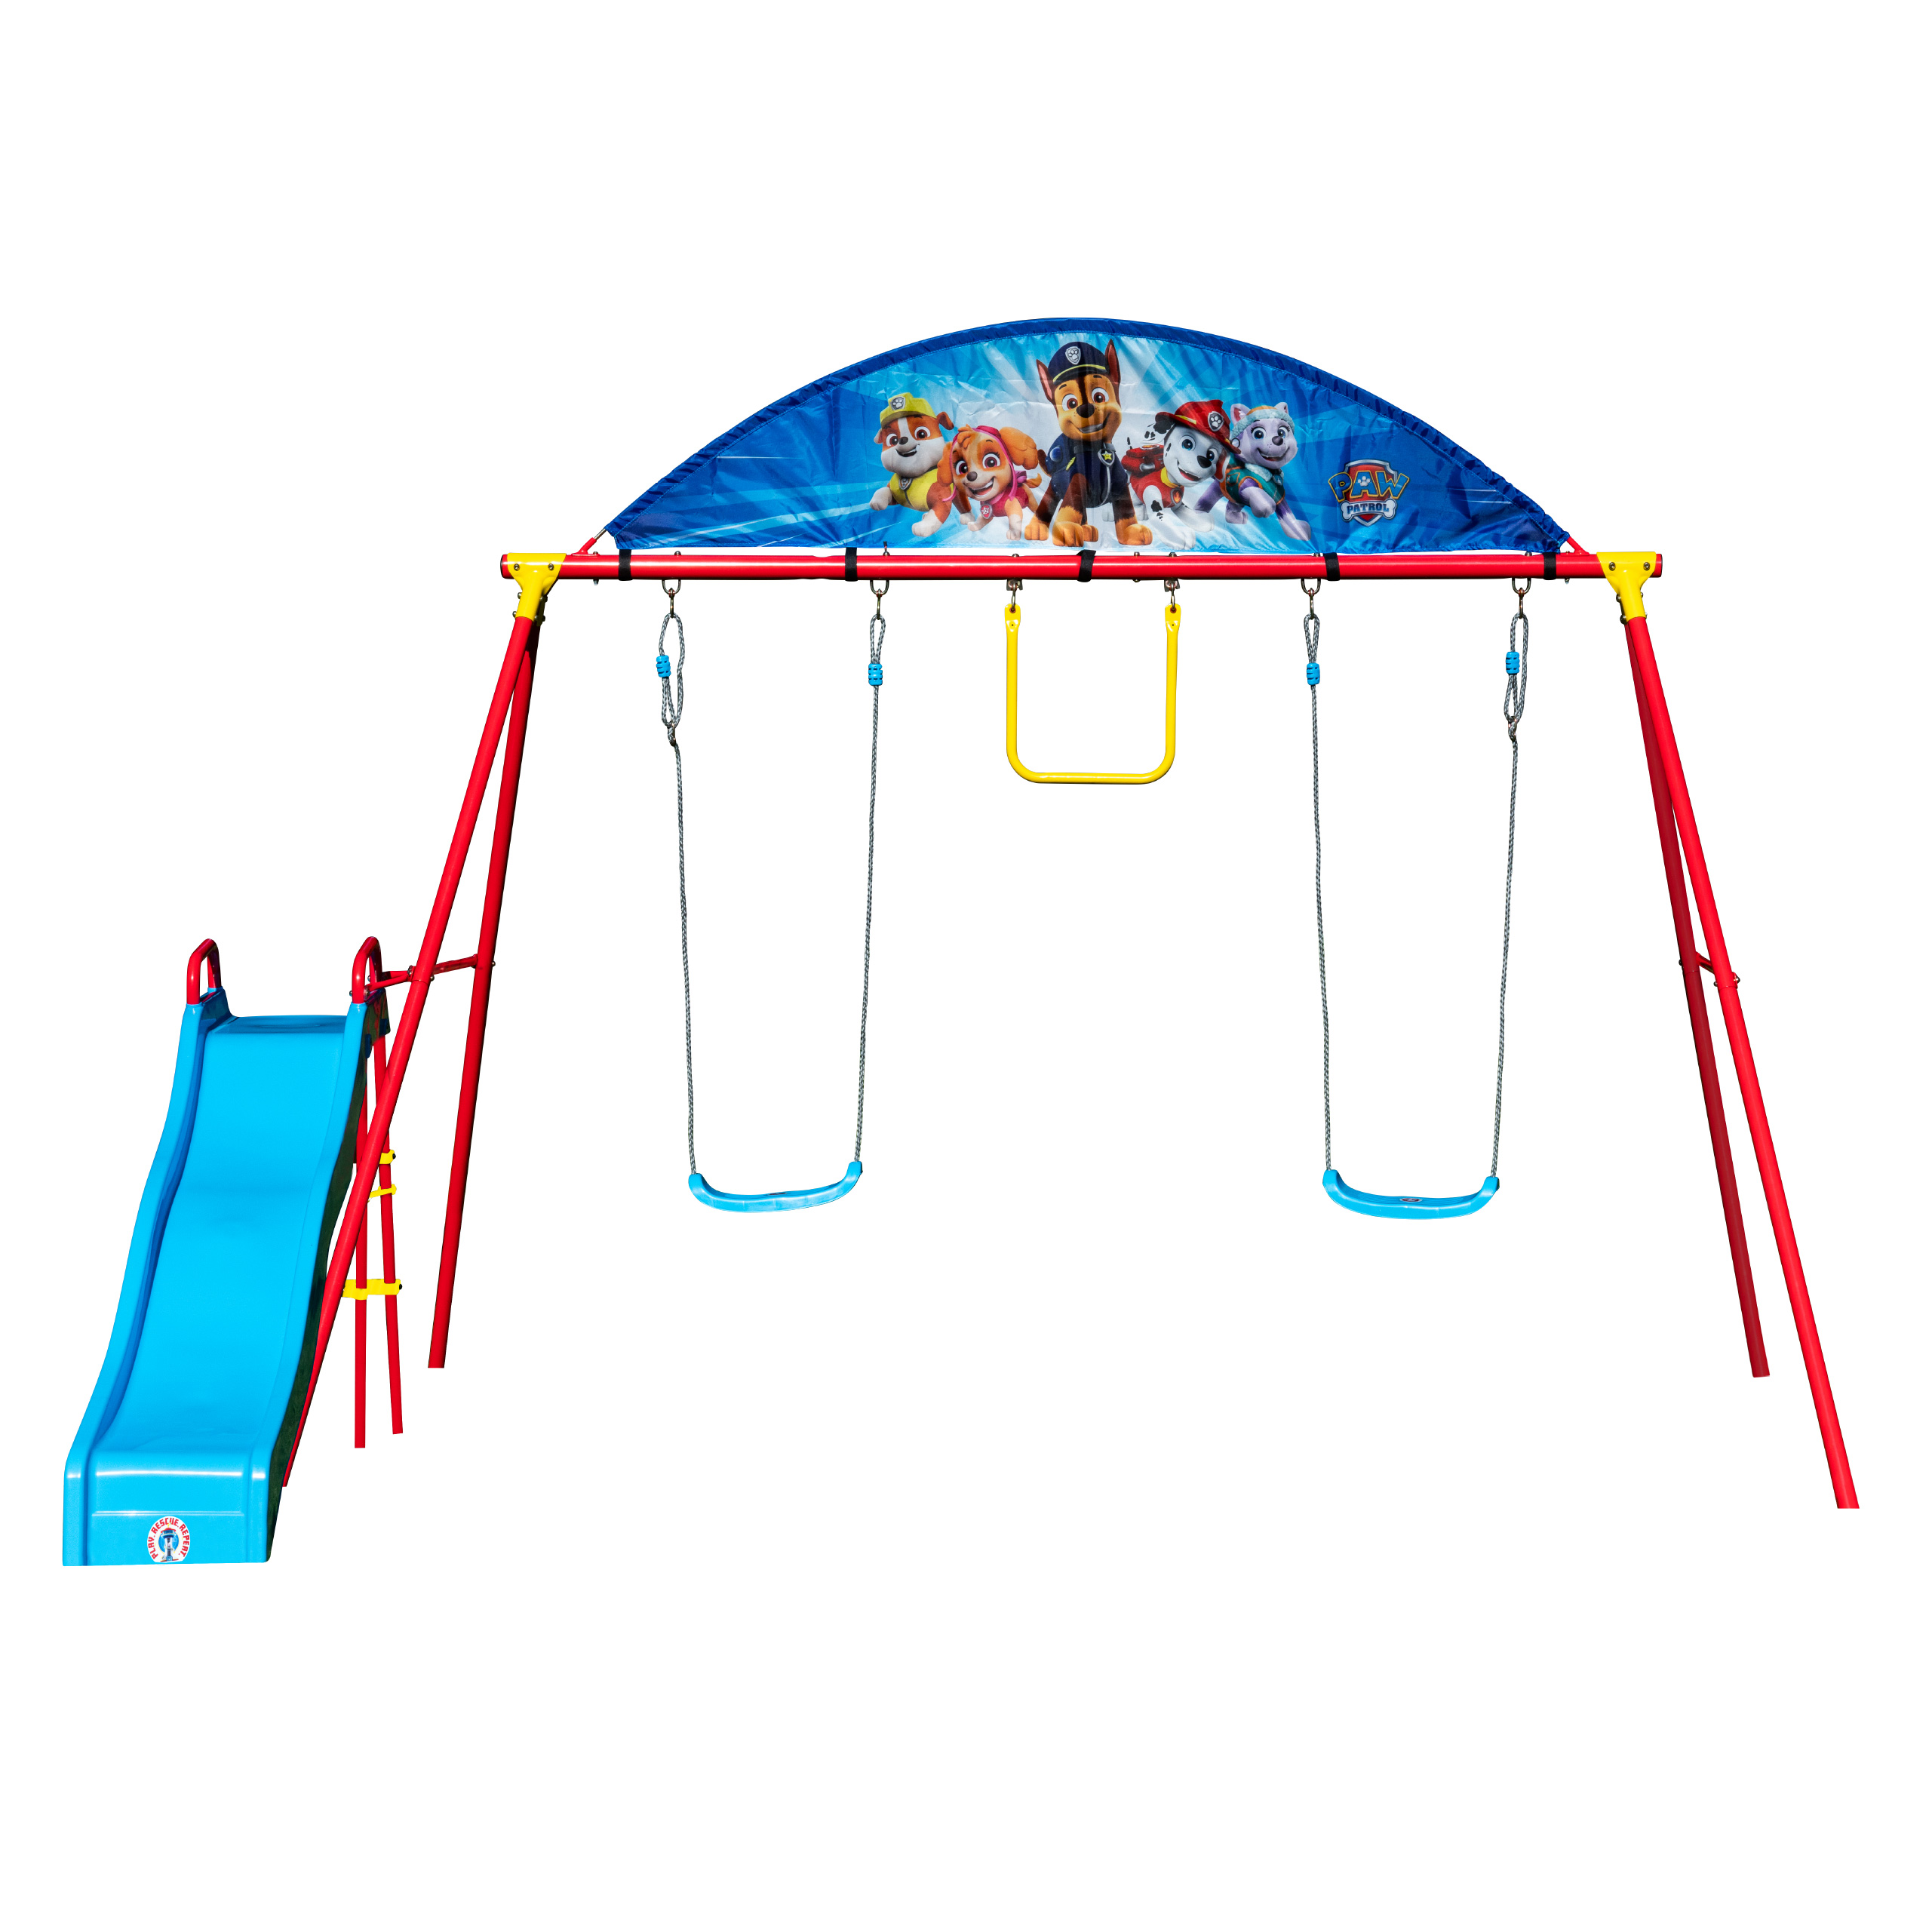 Swurfer Paw Patrol Deluxe Swing Set for Kids, Ages 4 and Up - image 1 of 7